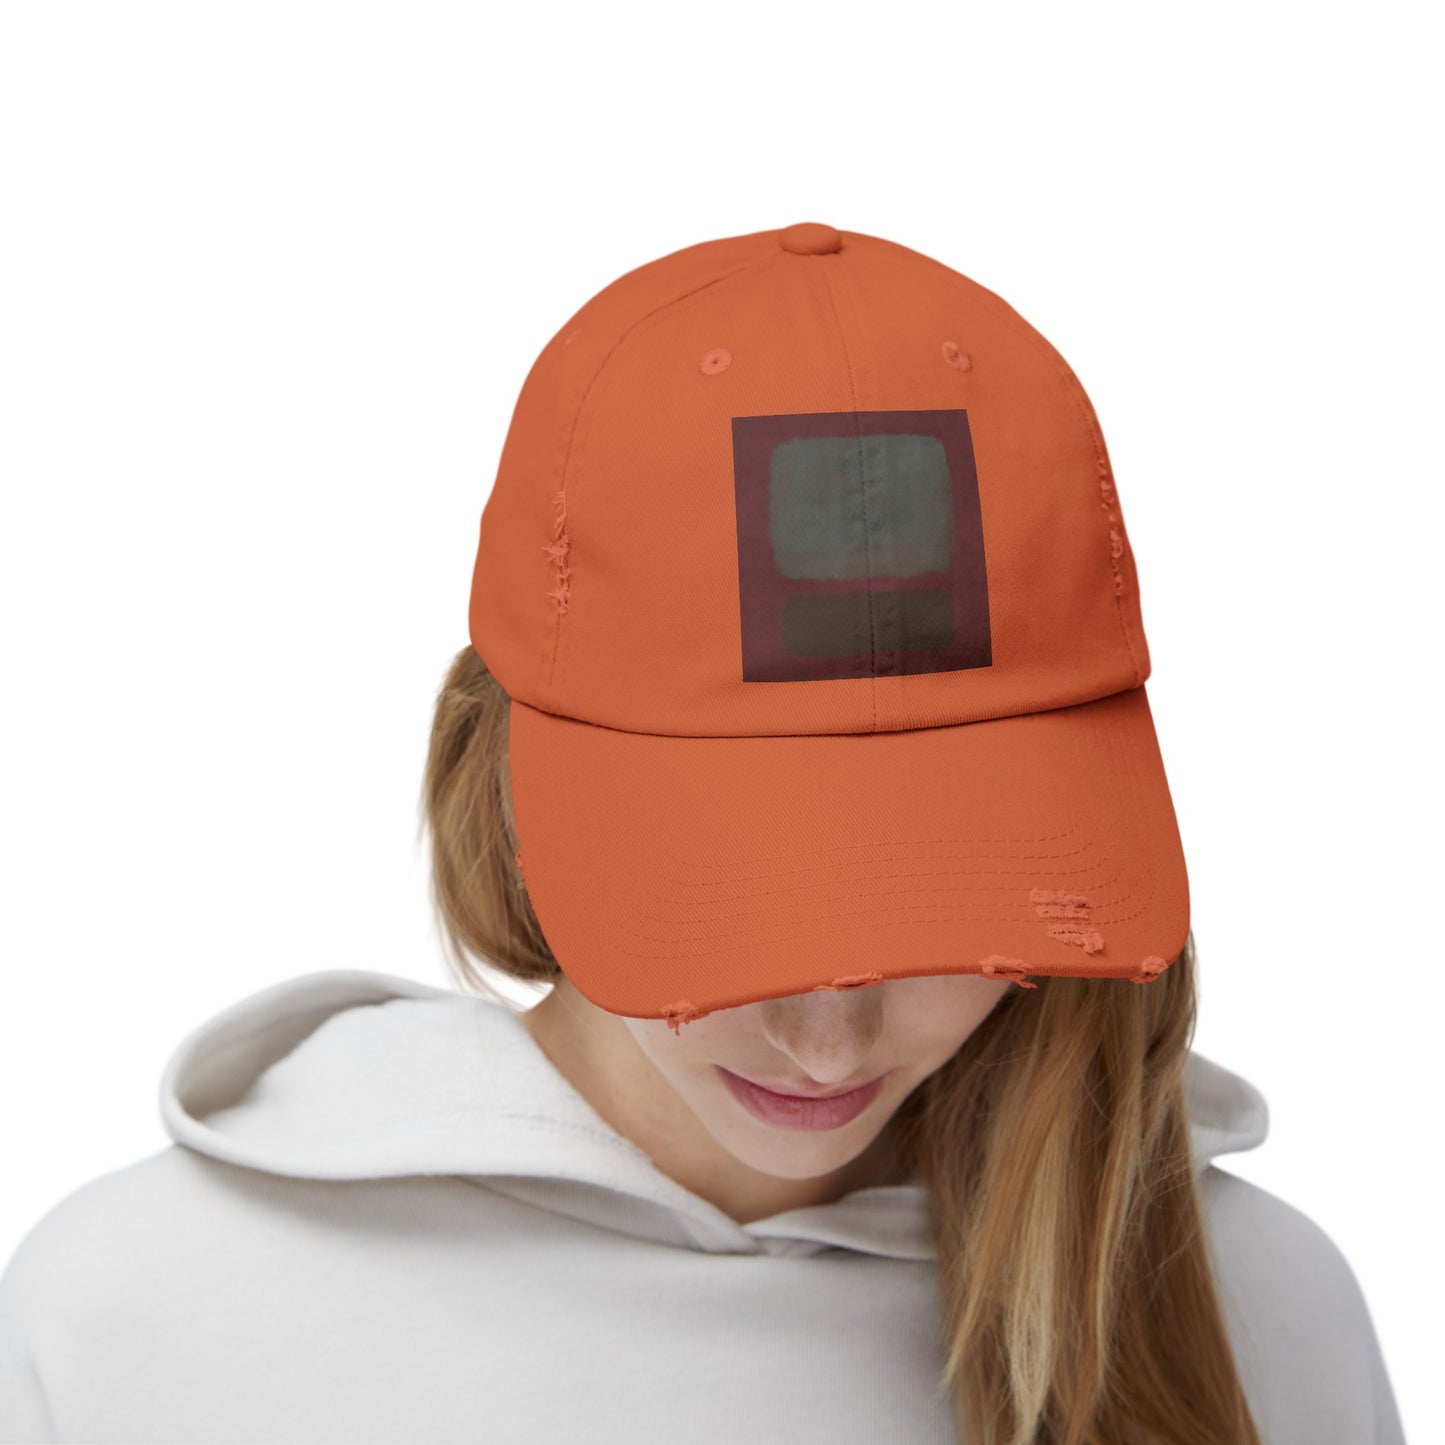 a woman wearing an orange hat with a black square on it